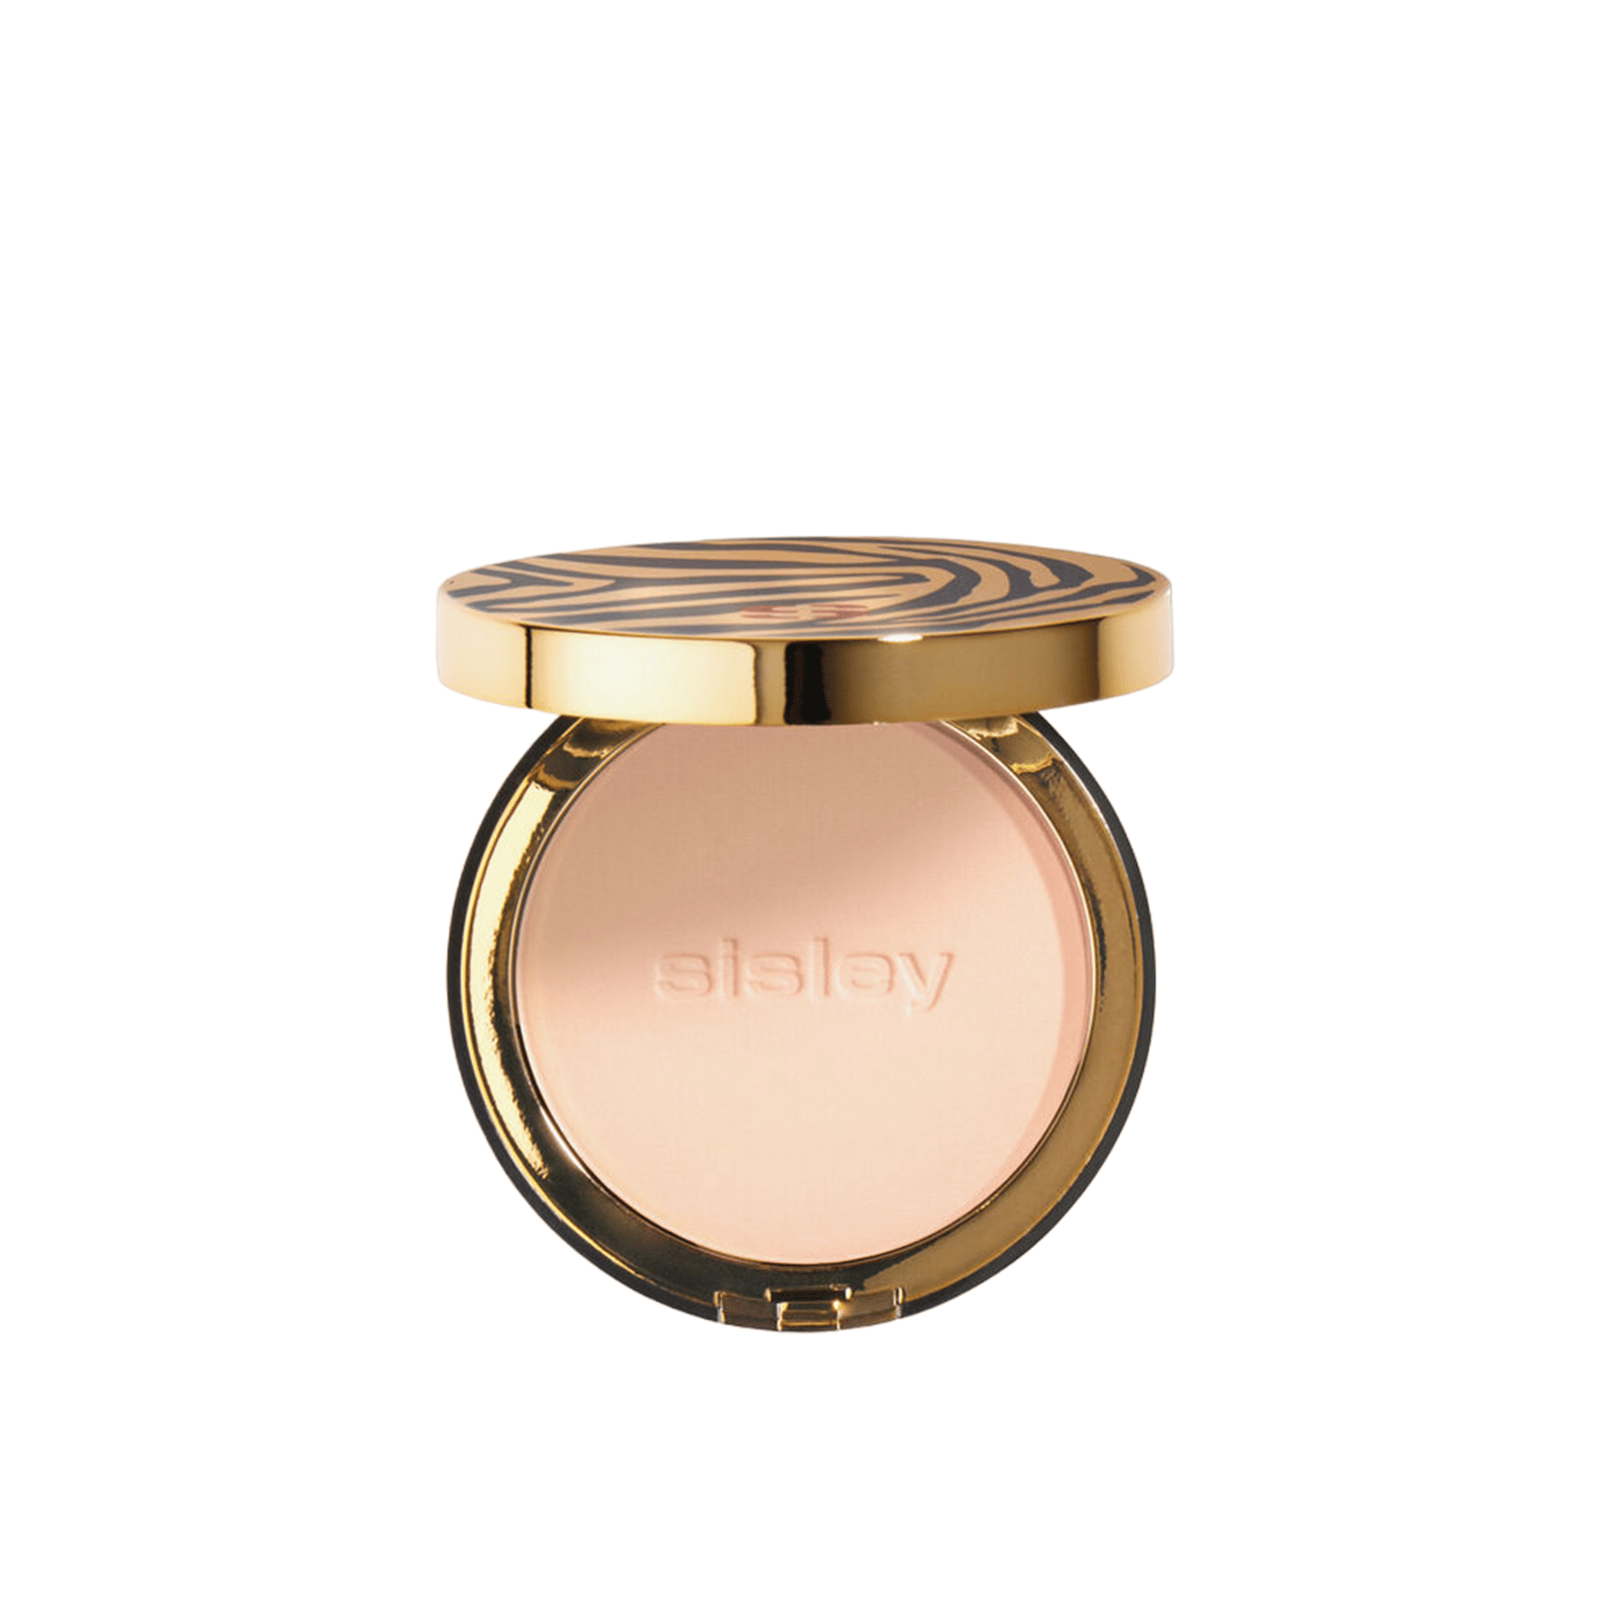 Sisley Paris Phyto-Poudre Compacte Matifying And Beautifying Pressed Powder